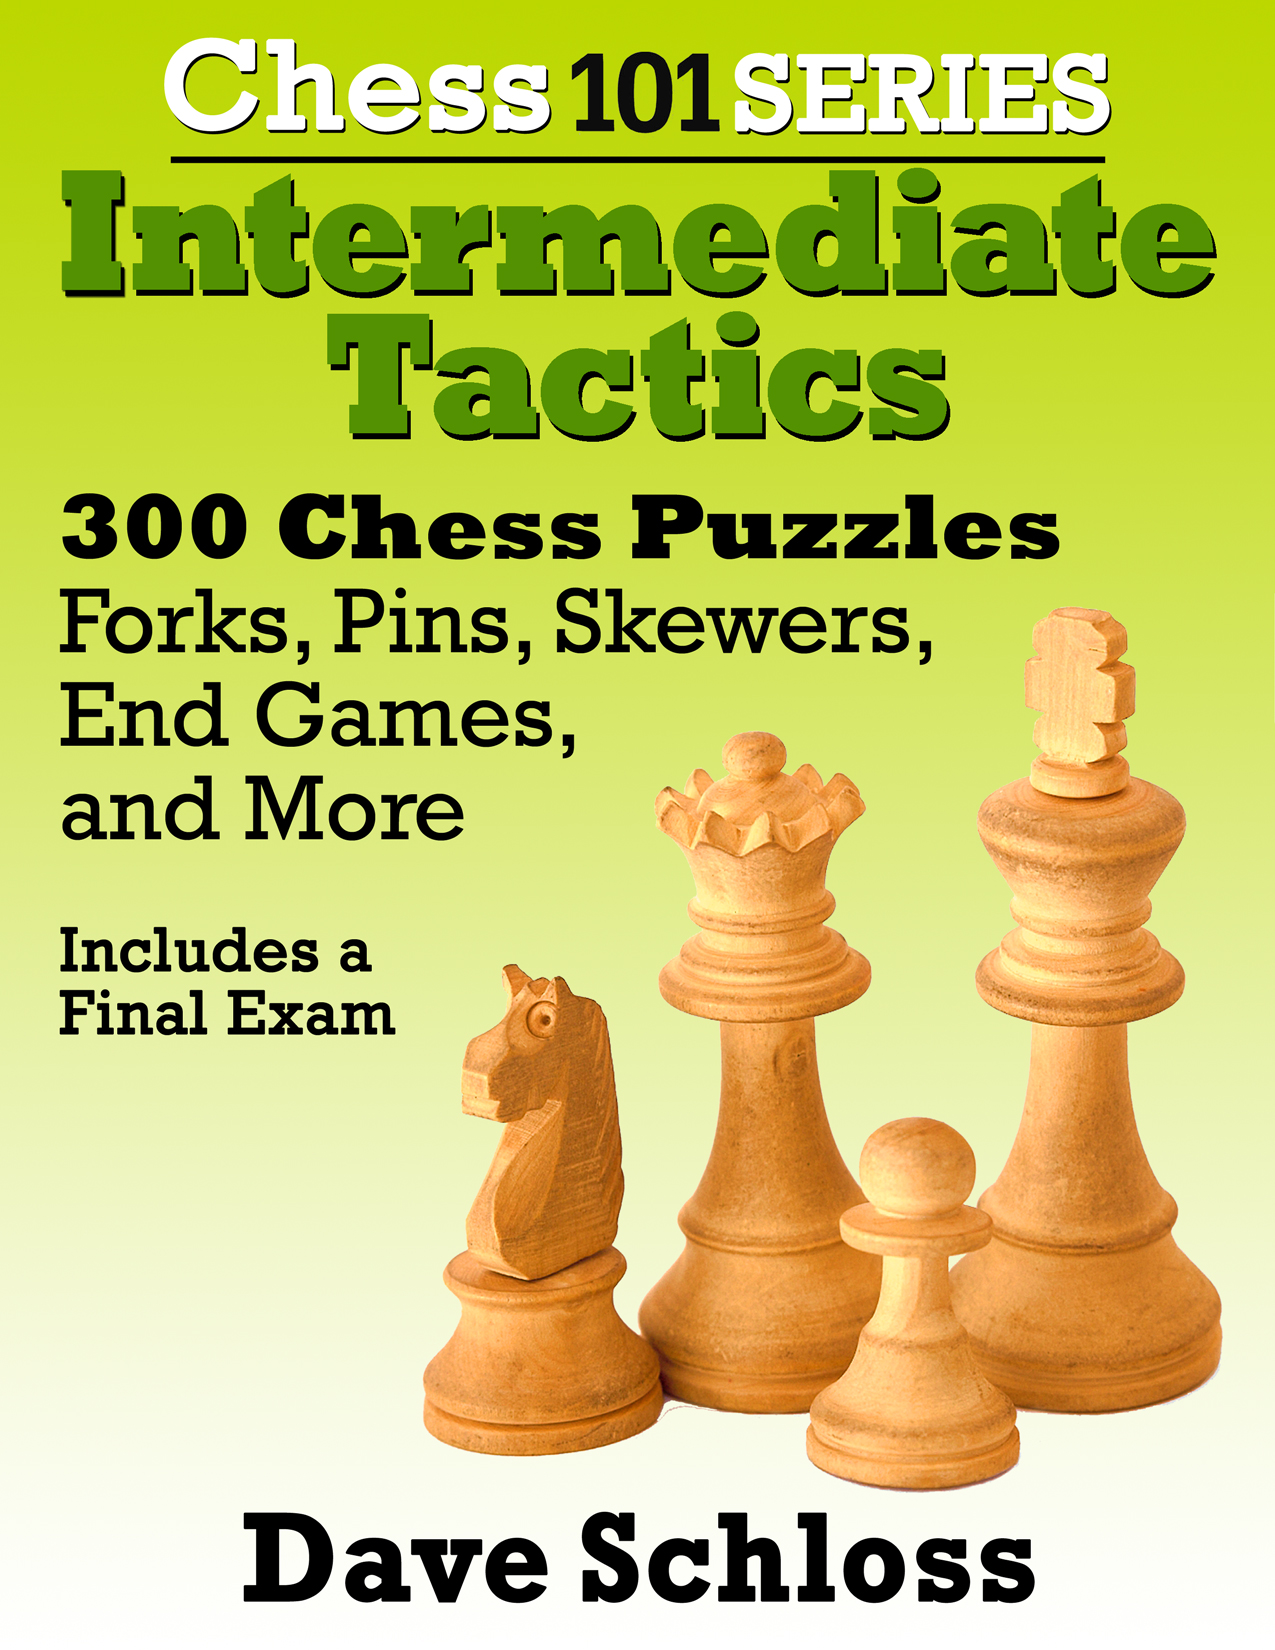 <i>300 chess tactics puzzles covering pins, forks, skewers, end games and more!</i>